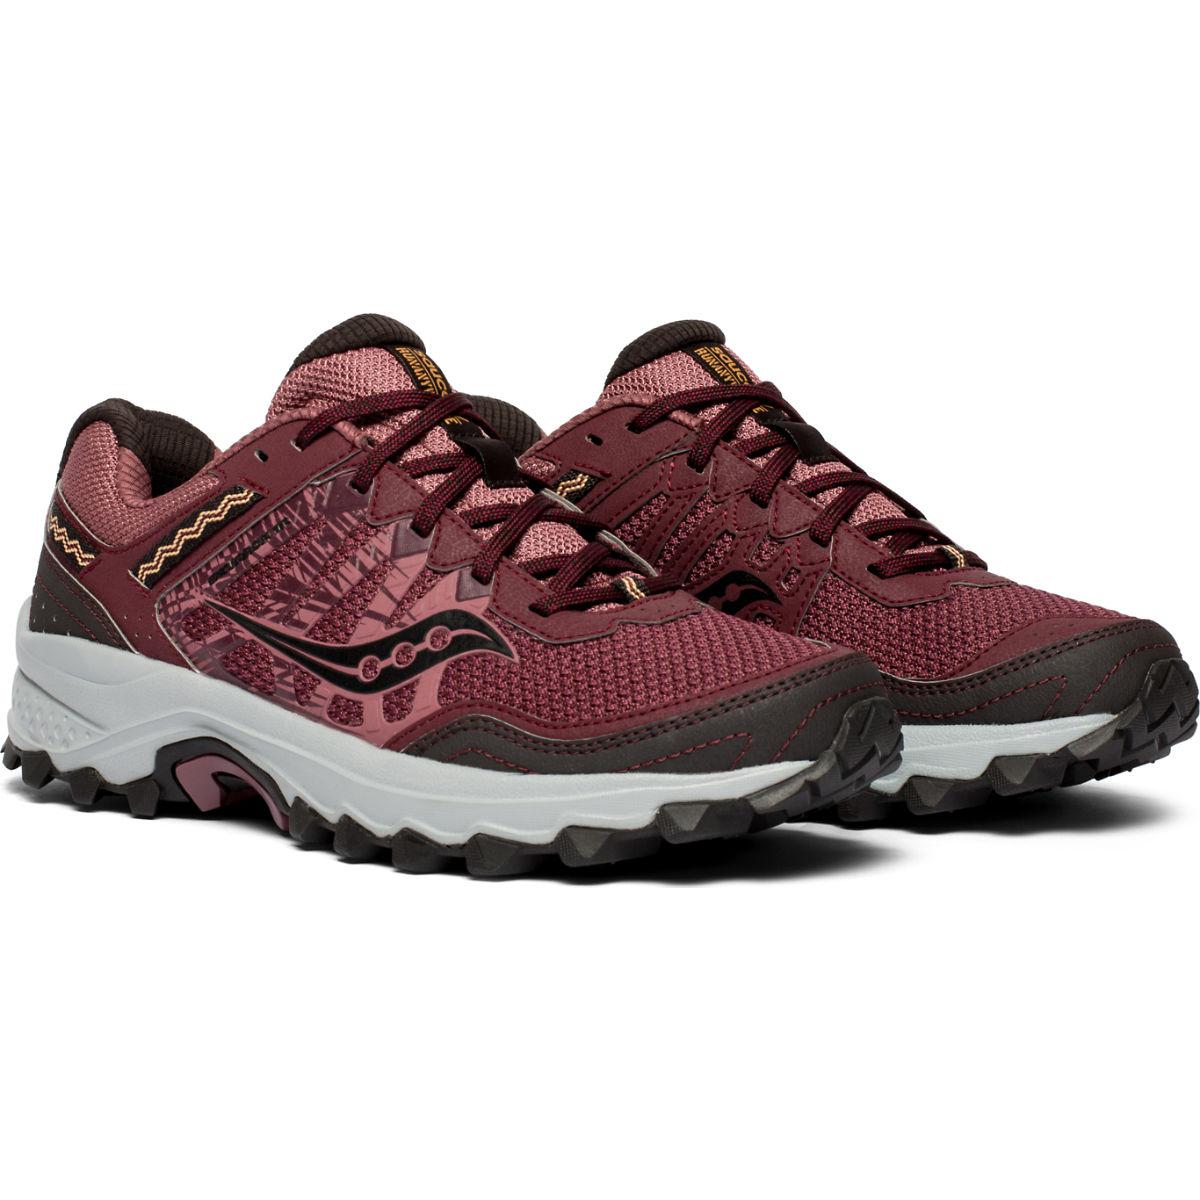 Saucony Synthetic Grid Excursion Tr12 (burgundy/grey) Shoes - Lyst